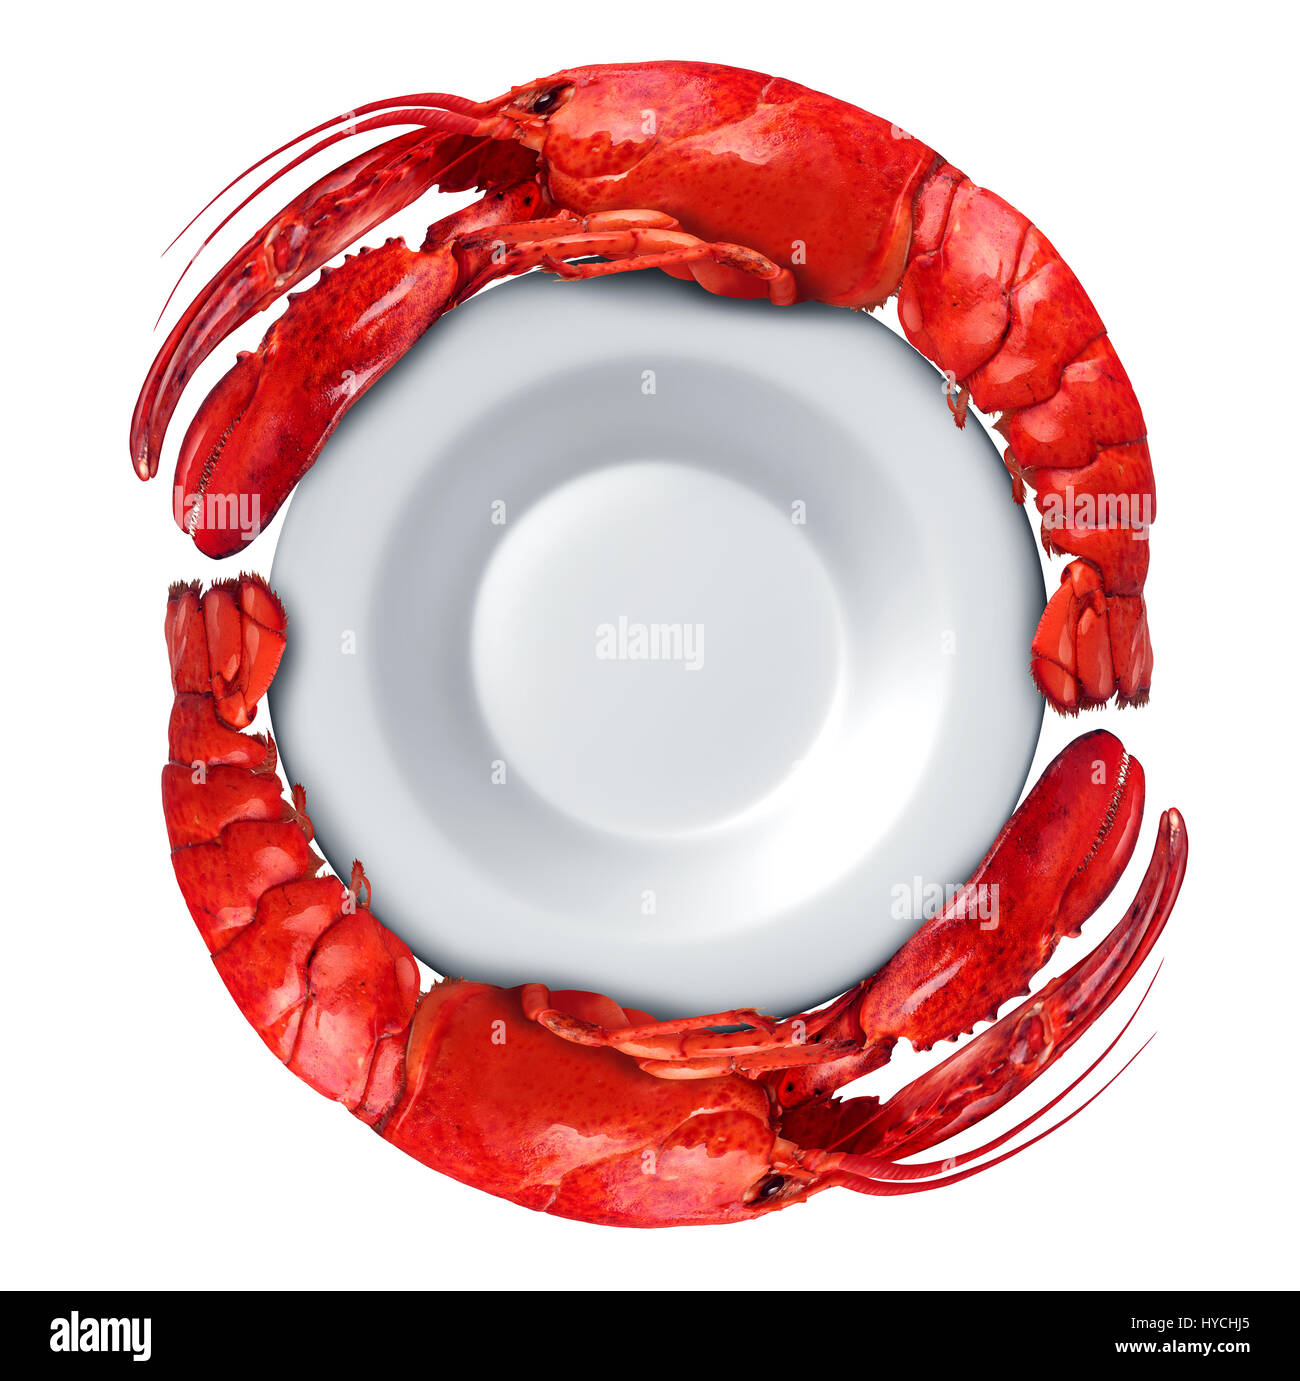 Lobster dish with Lobsters shaped as a circle around a blank plate isolated on a white background as fresh seafood or shellfish food. Stock Photo